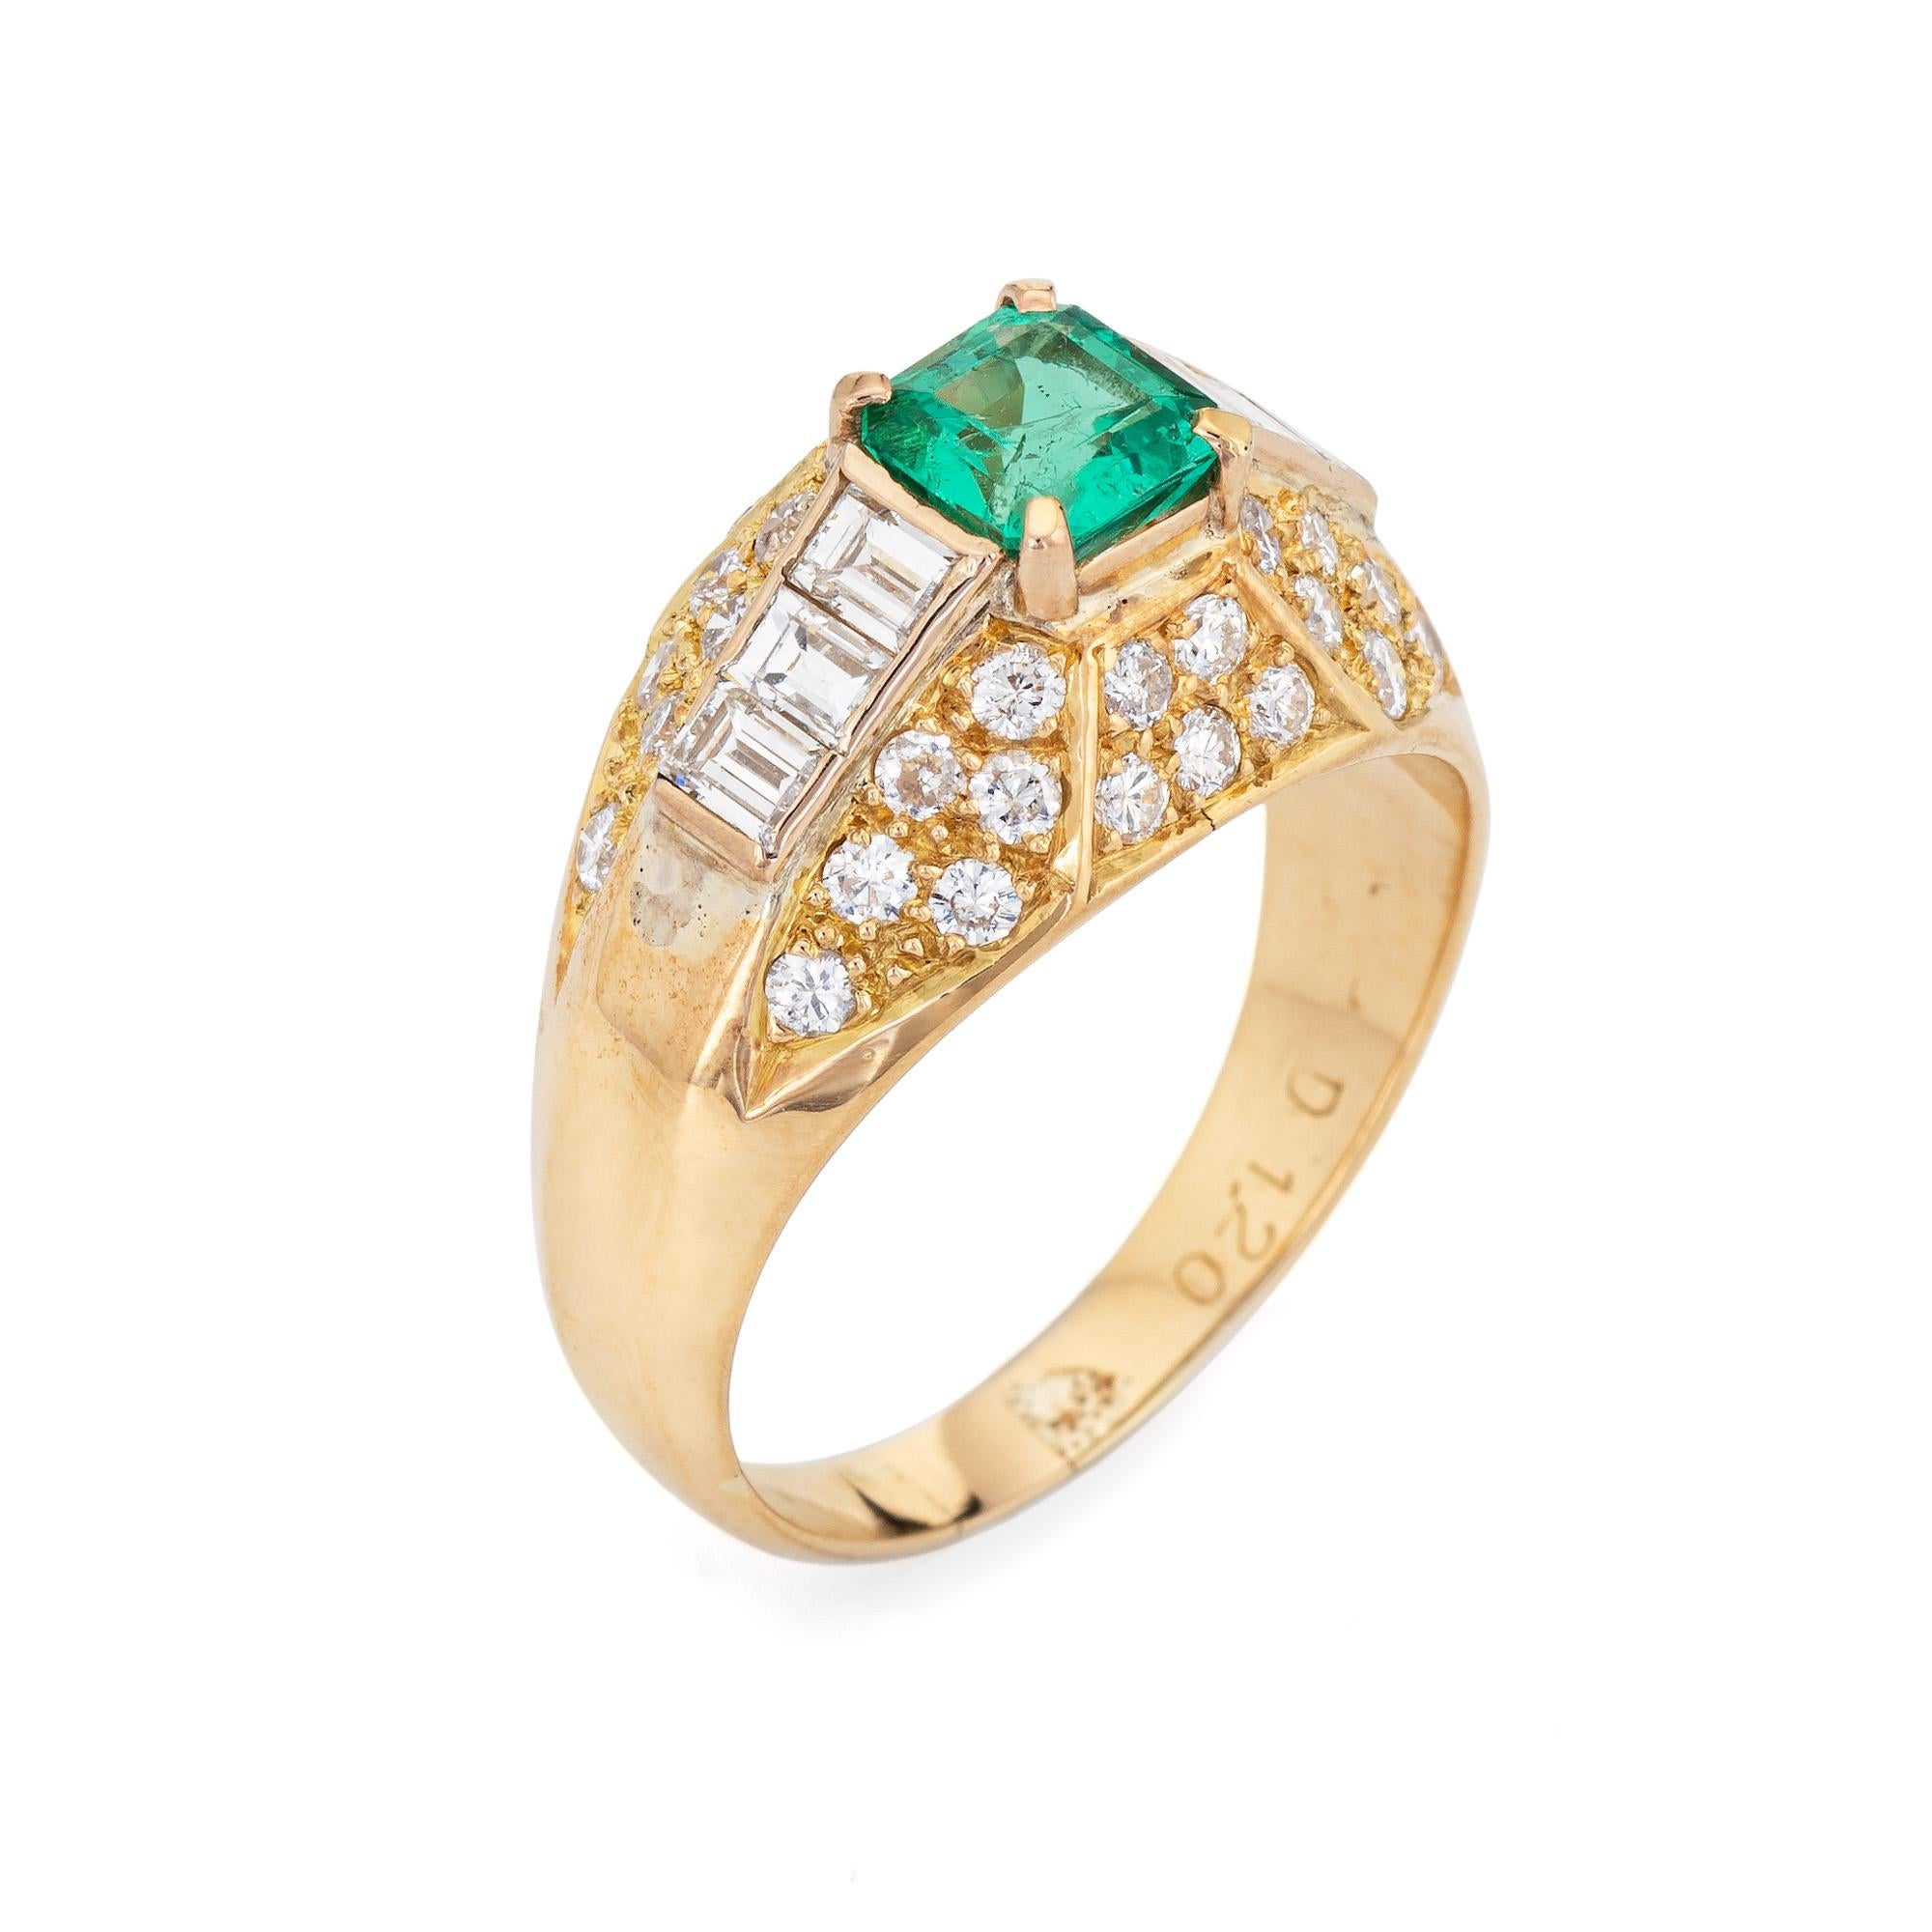 Stylish vintage emerald & diamond ring (circa 1980s to 1990s) crafted in 18 karat yellow gold. 

Emerald cut emerald is estimated at 0.98 carats, accented with an estimated 1.20 carats of mixed cut diamonds (estimated at G-H color and VS2-SI1